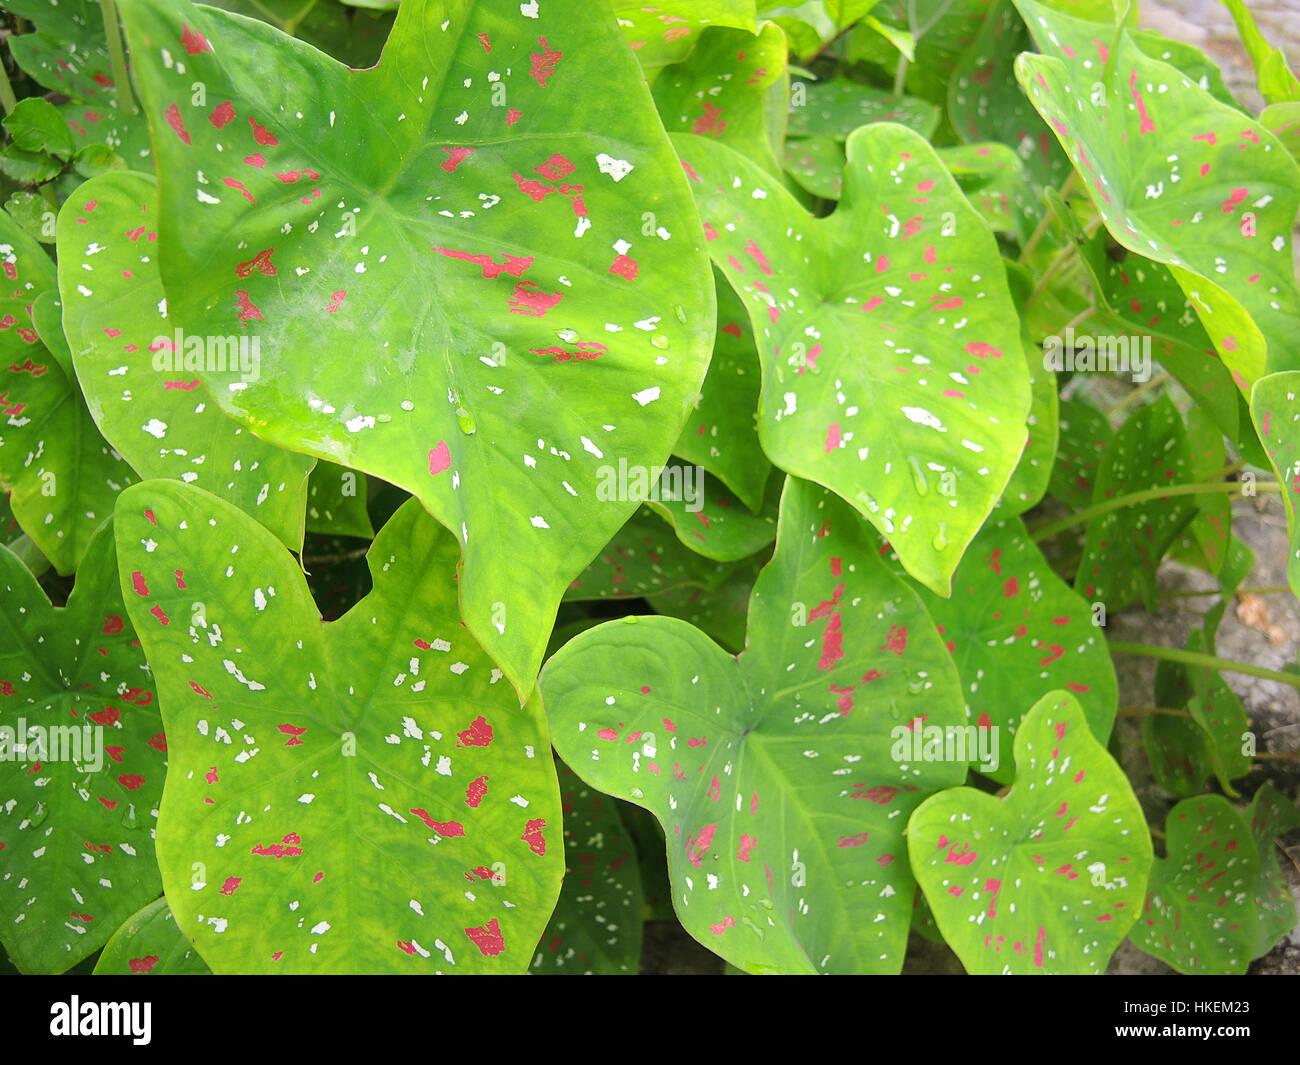 Caladium bicolour. A decorative plant with red white and green leaves Stock Photo